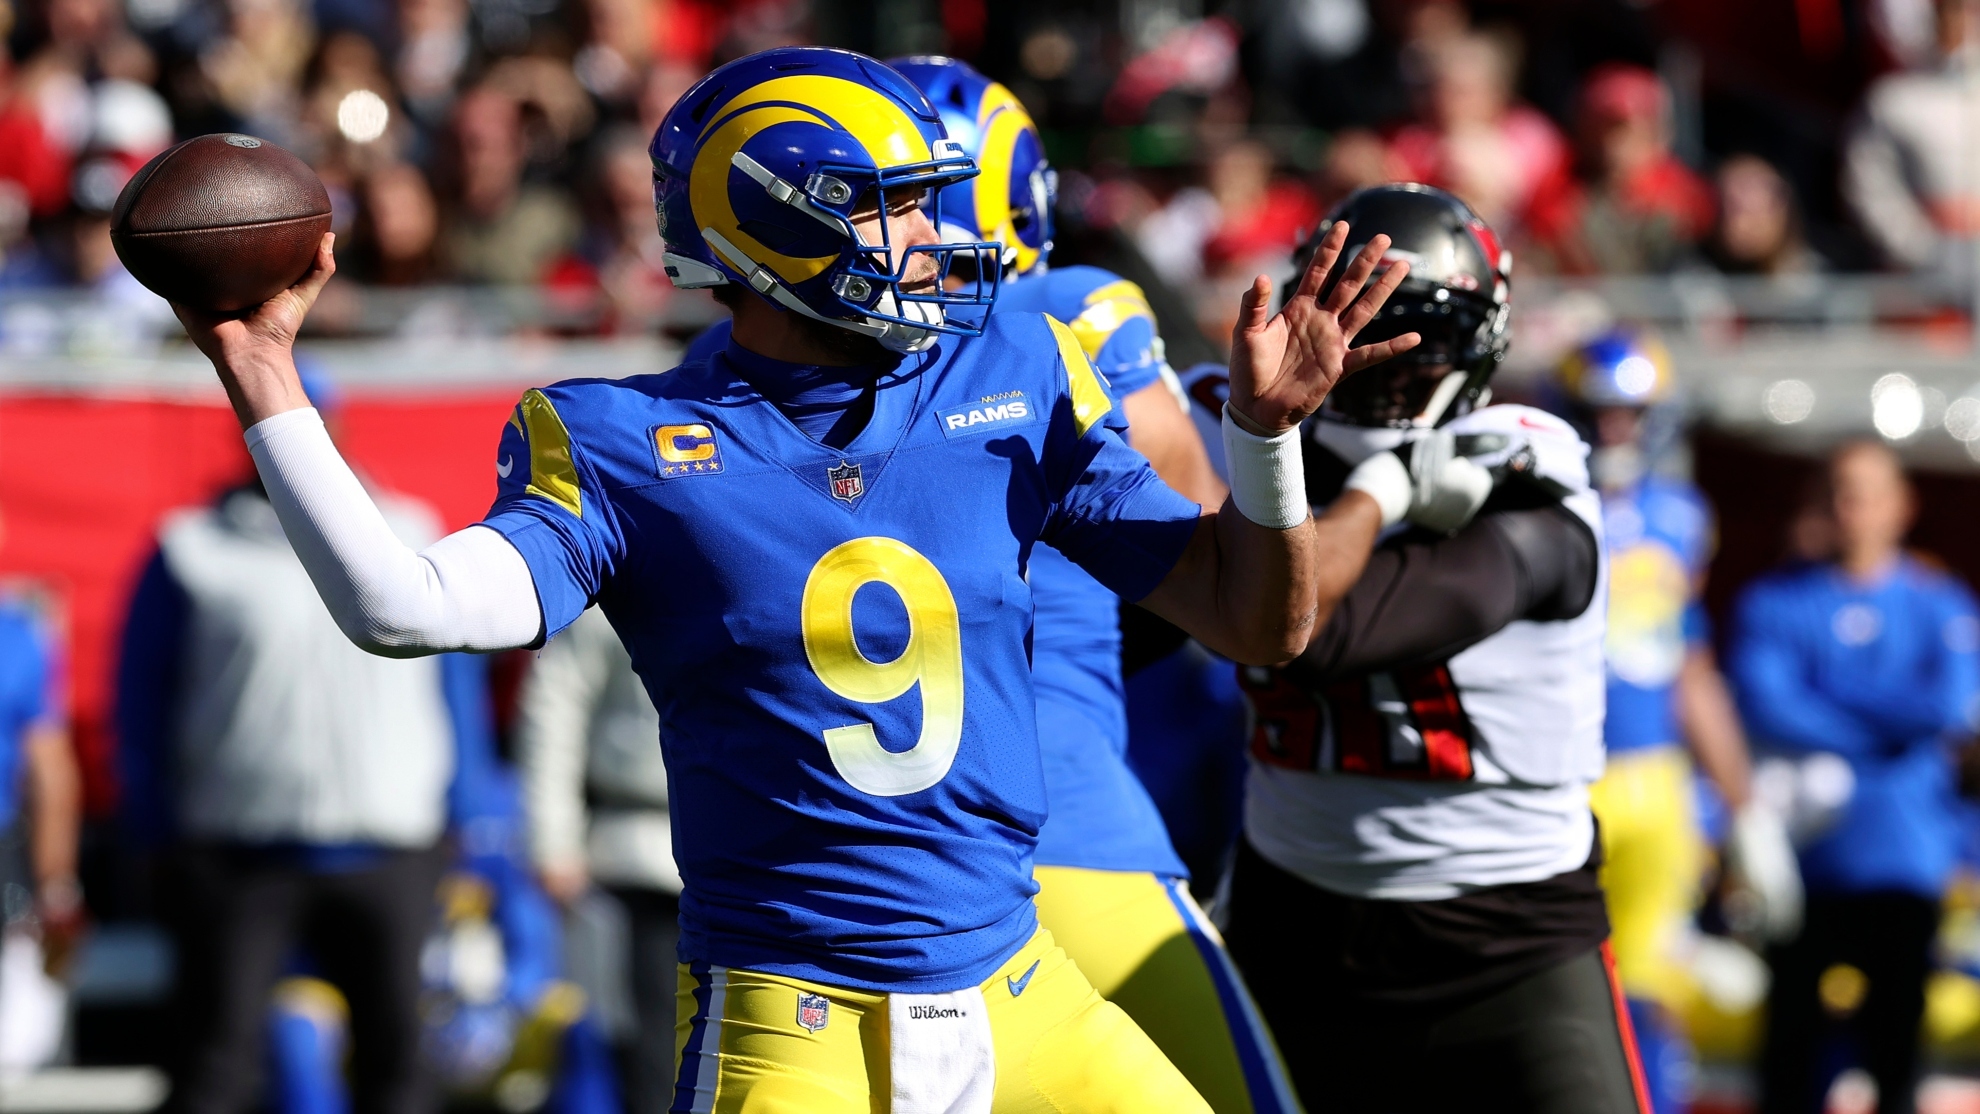 Rams 30-27 Buccaneers: Score and highlights